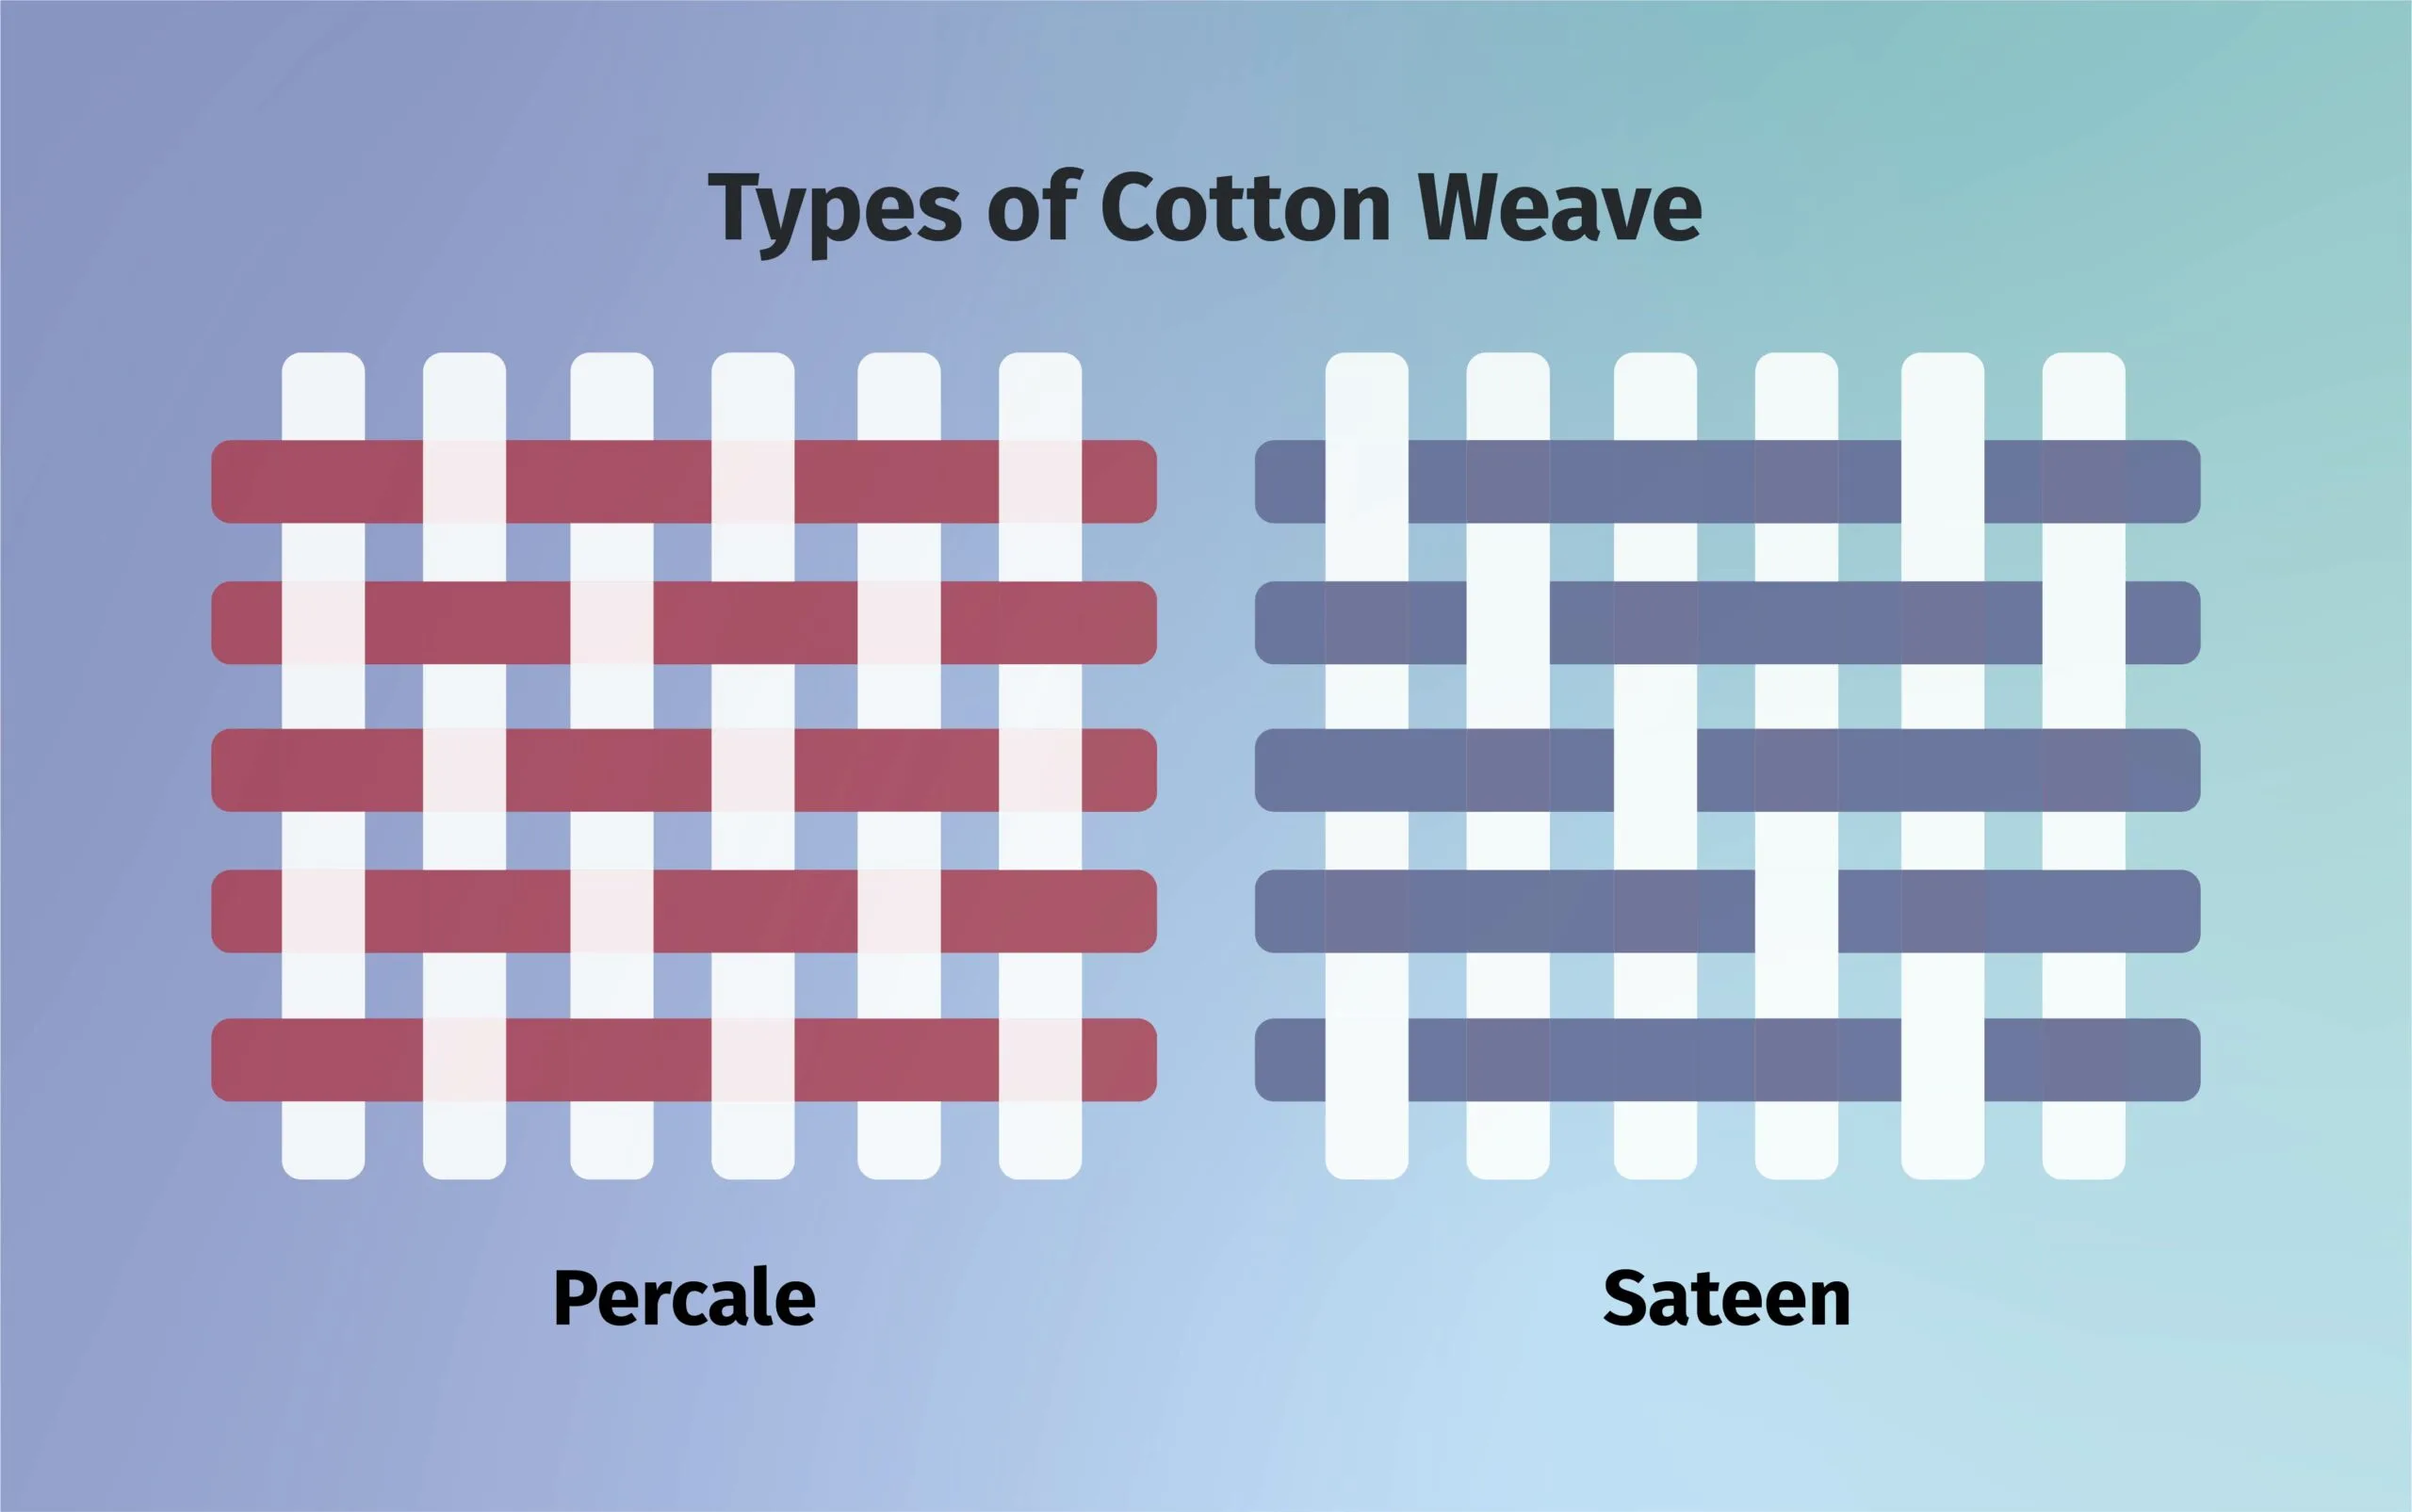 A diagram illustrating the differences between Percale and Sateen cotton weaves.